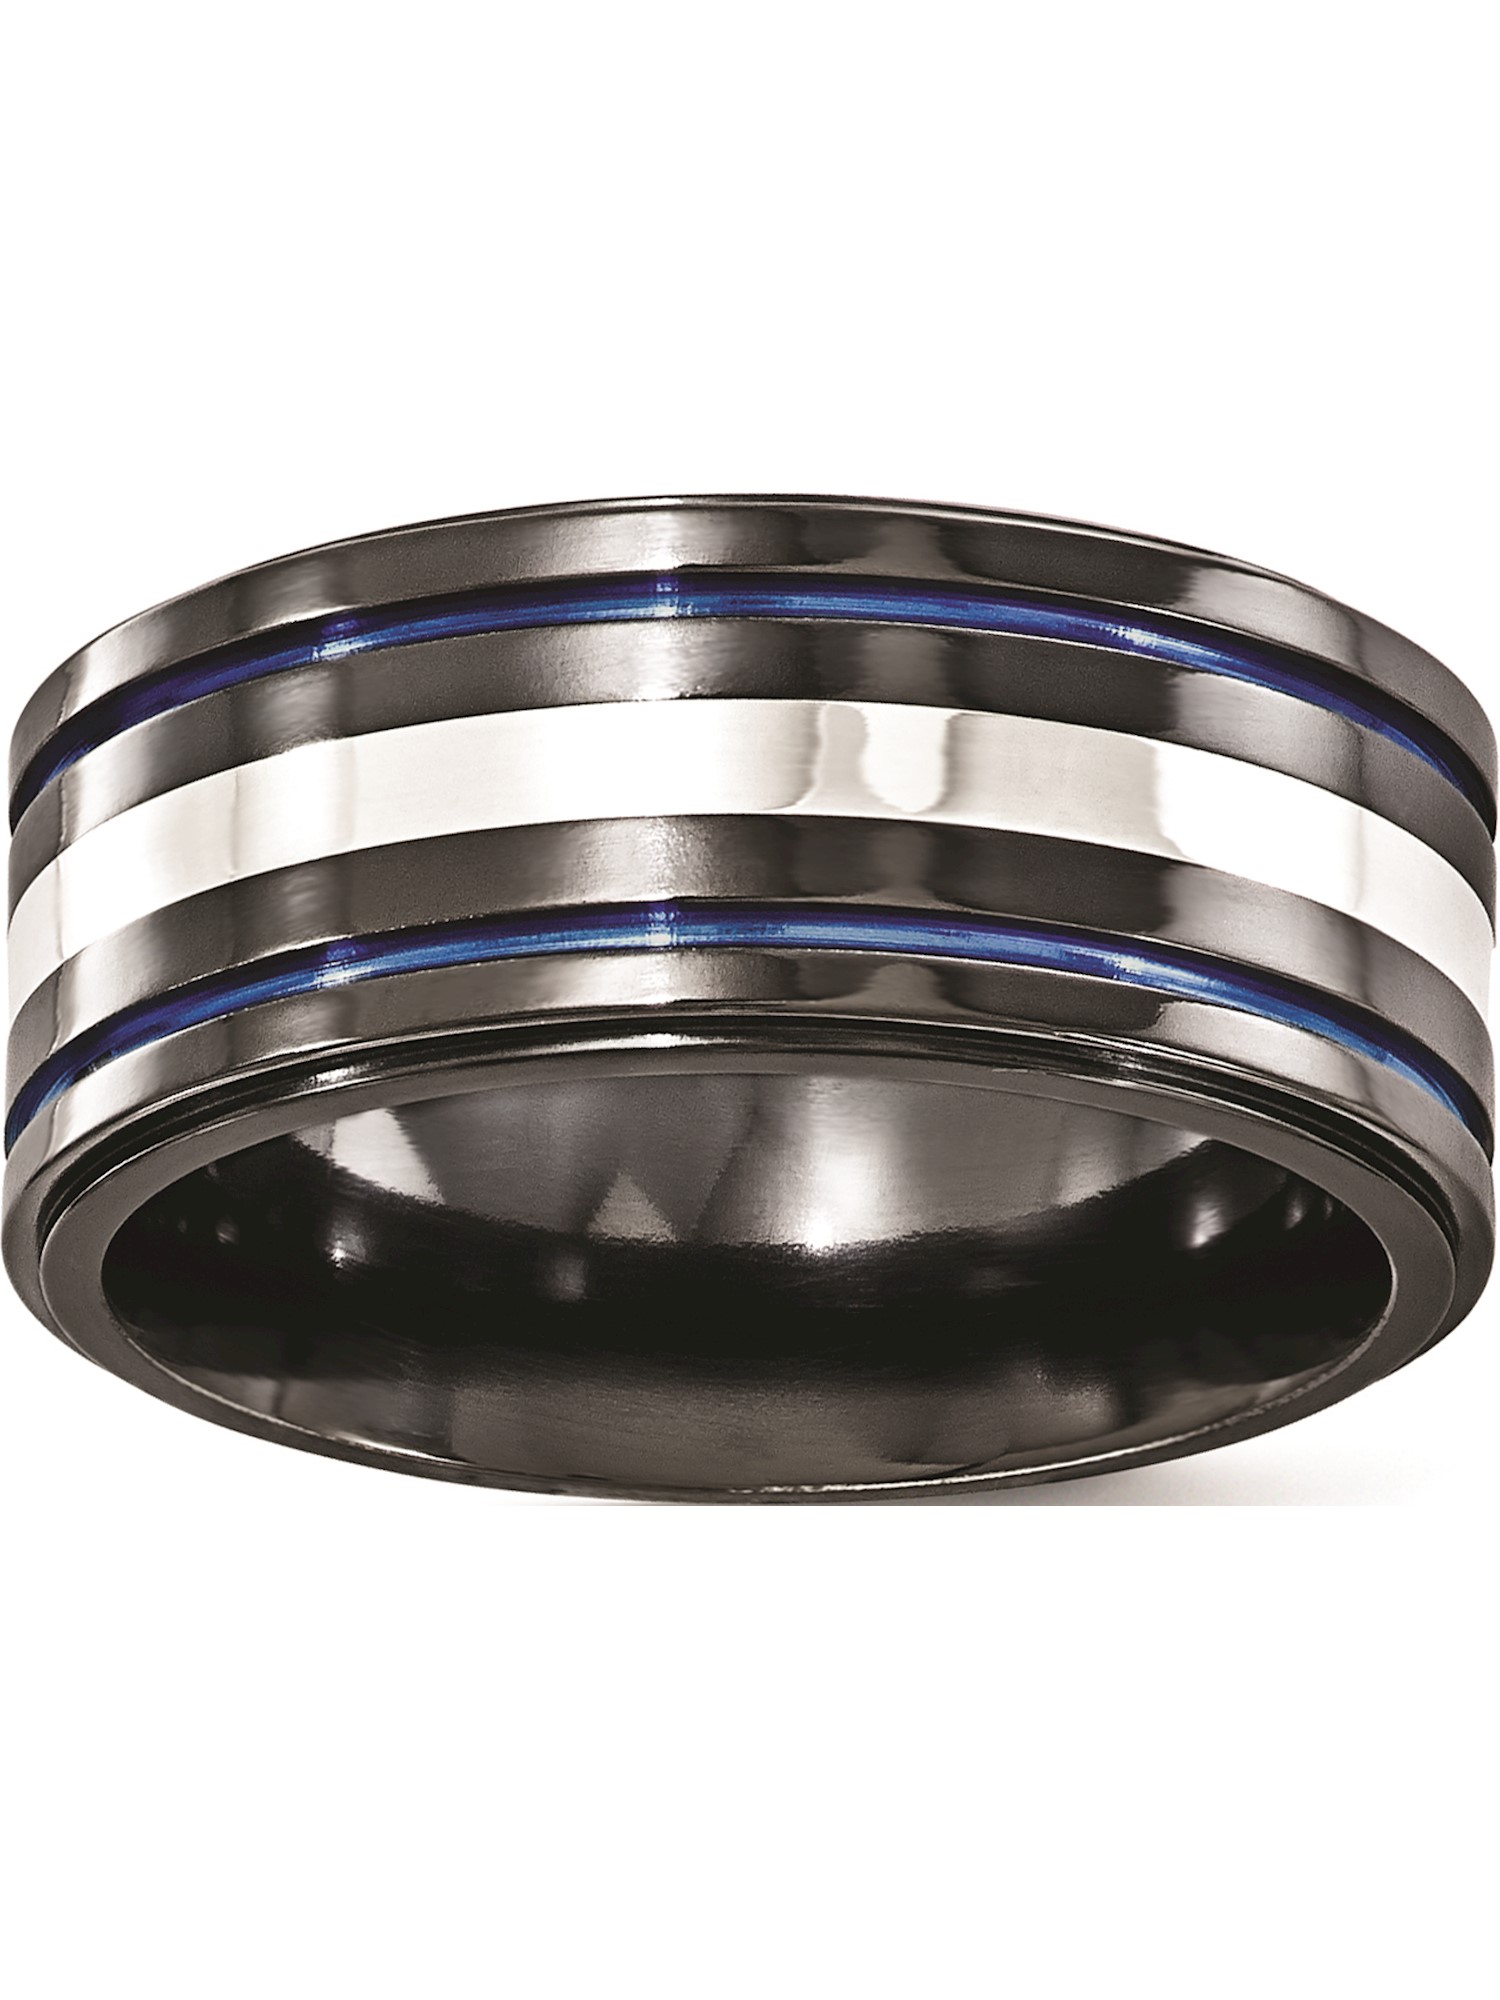 Details about  / Edward Mirell 925 Sterling Silver /& Black Titanium Inlay Black Stripe Ring S:10